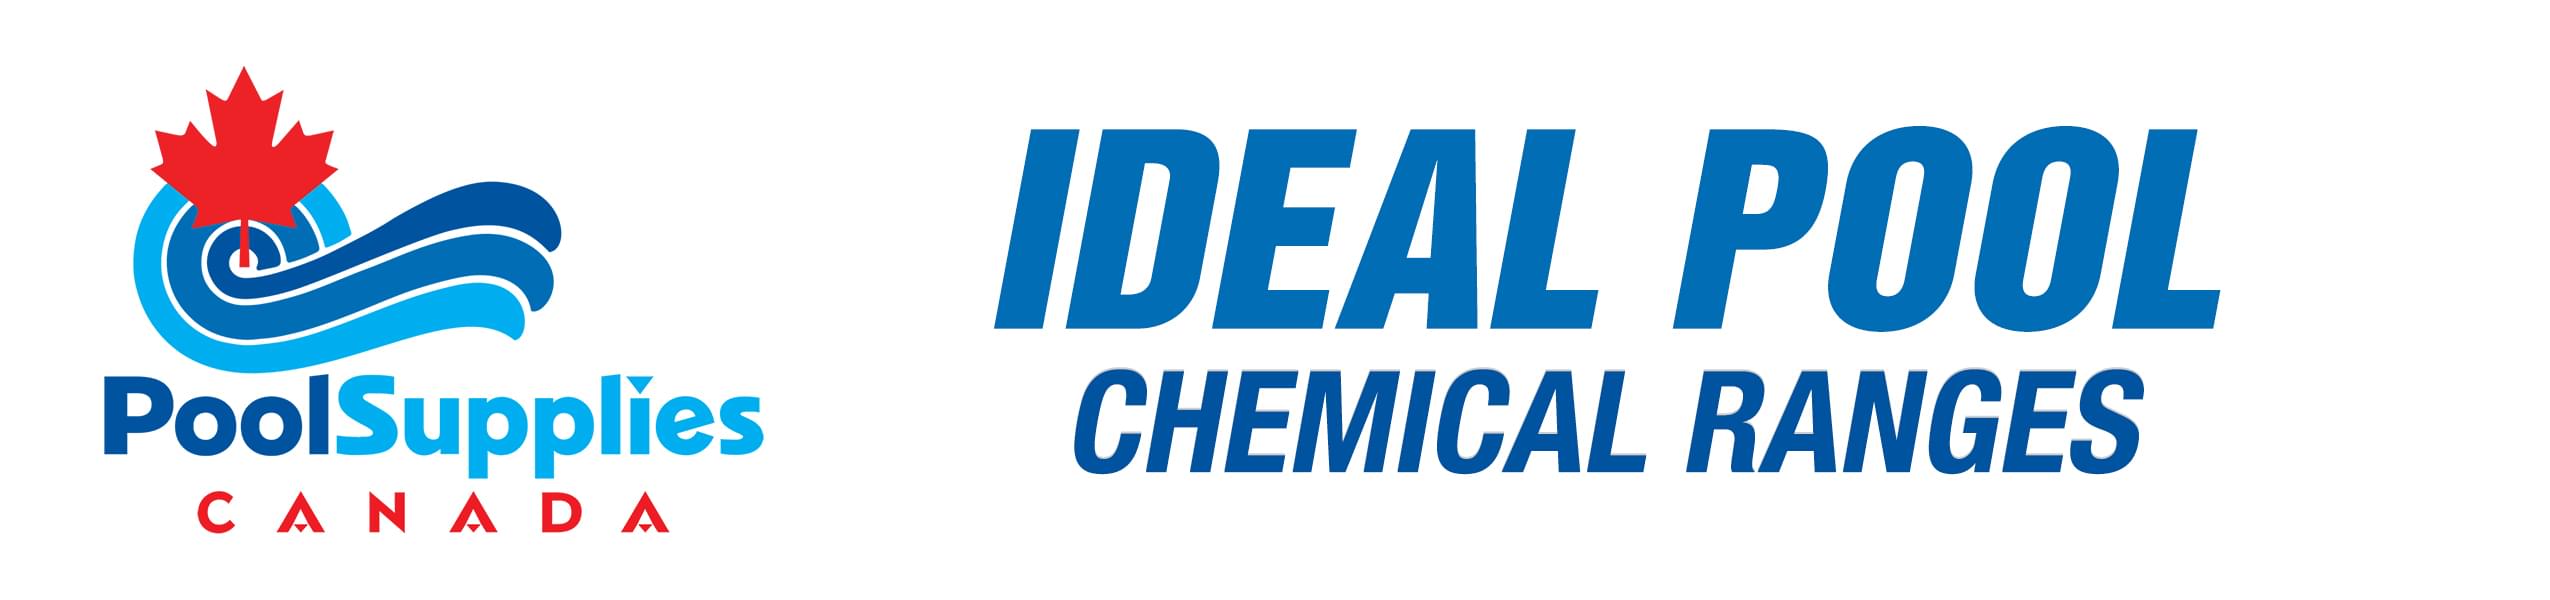 Ideal Pool Water Chemical Ranges